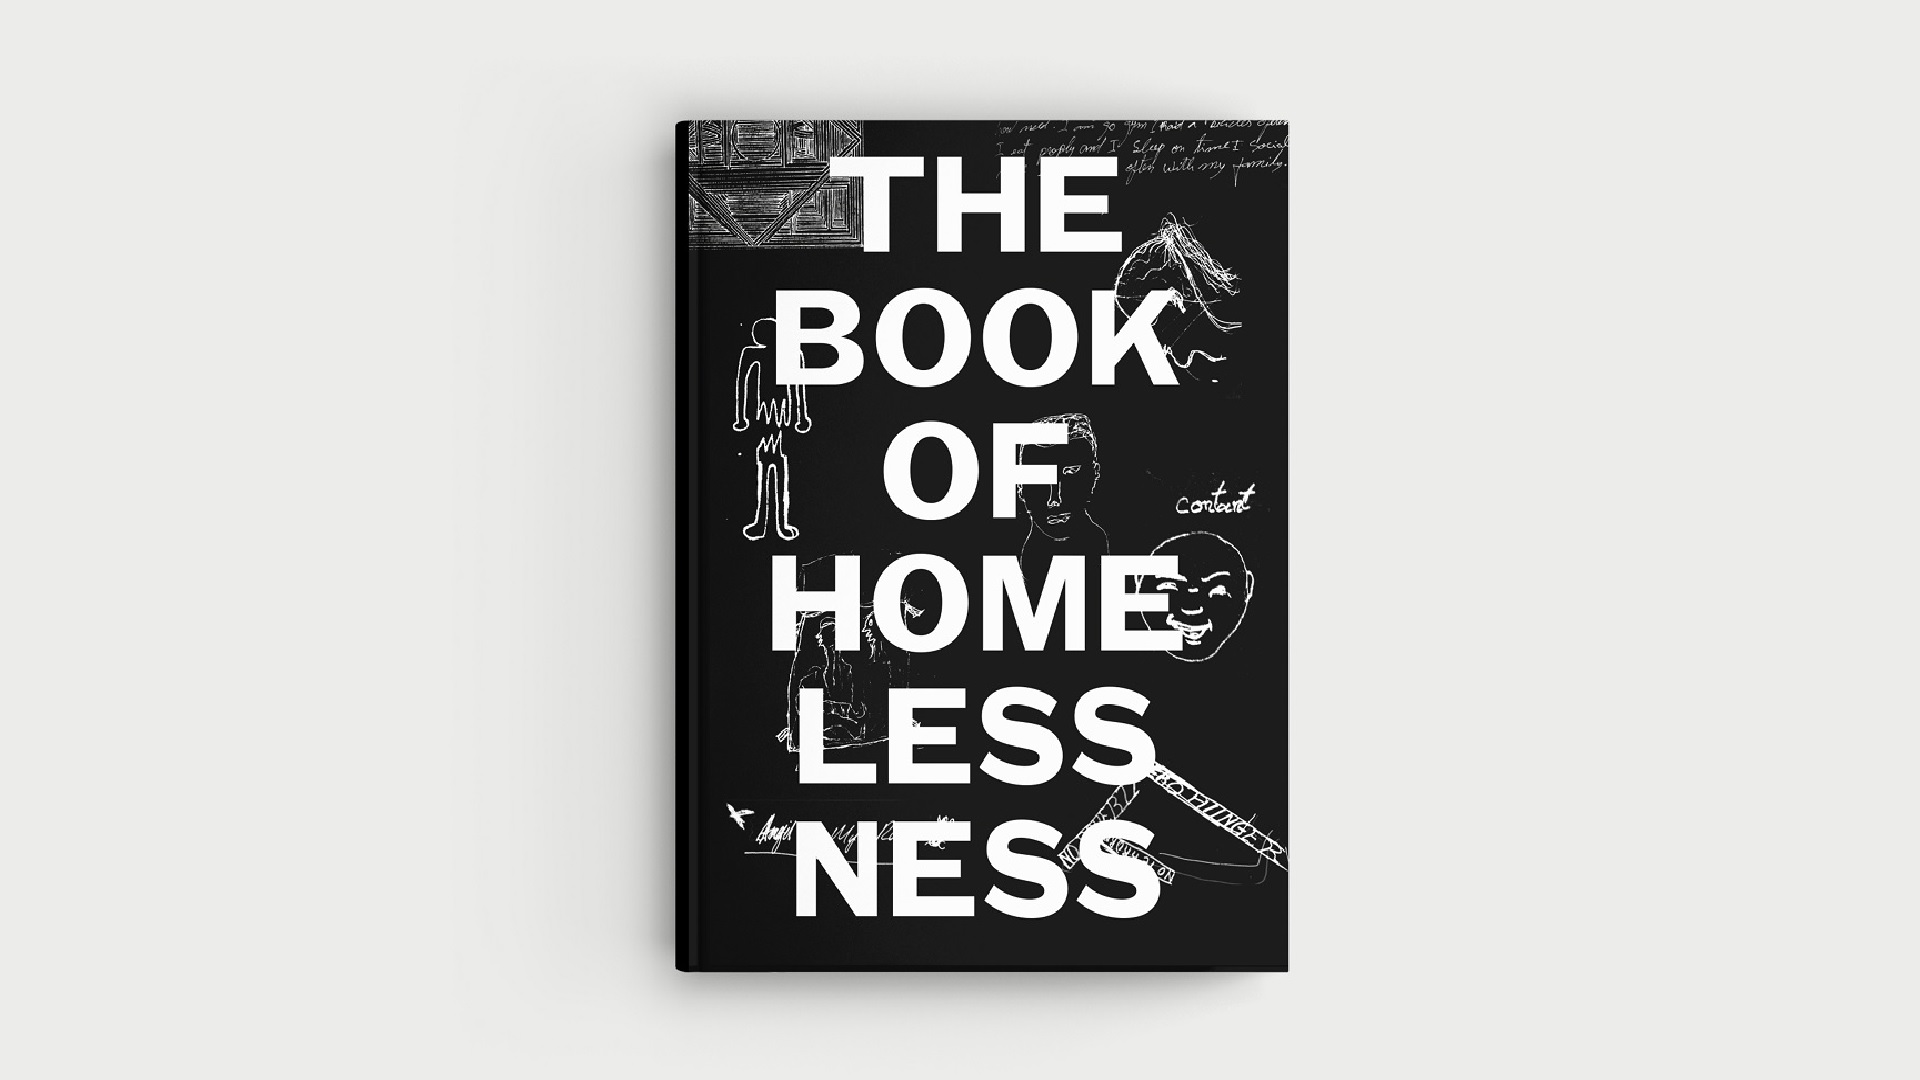 The Book of Homelessness is a the world's first graphic novel made entirely by people affected by homelessness